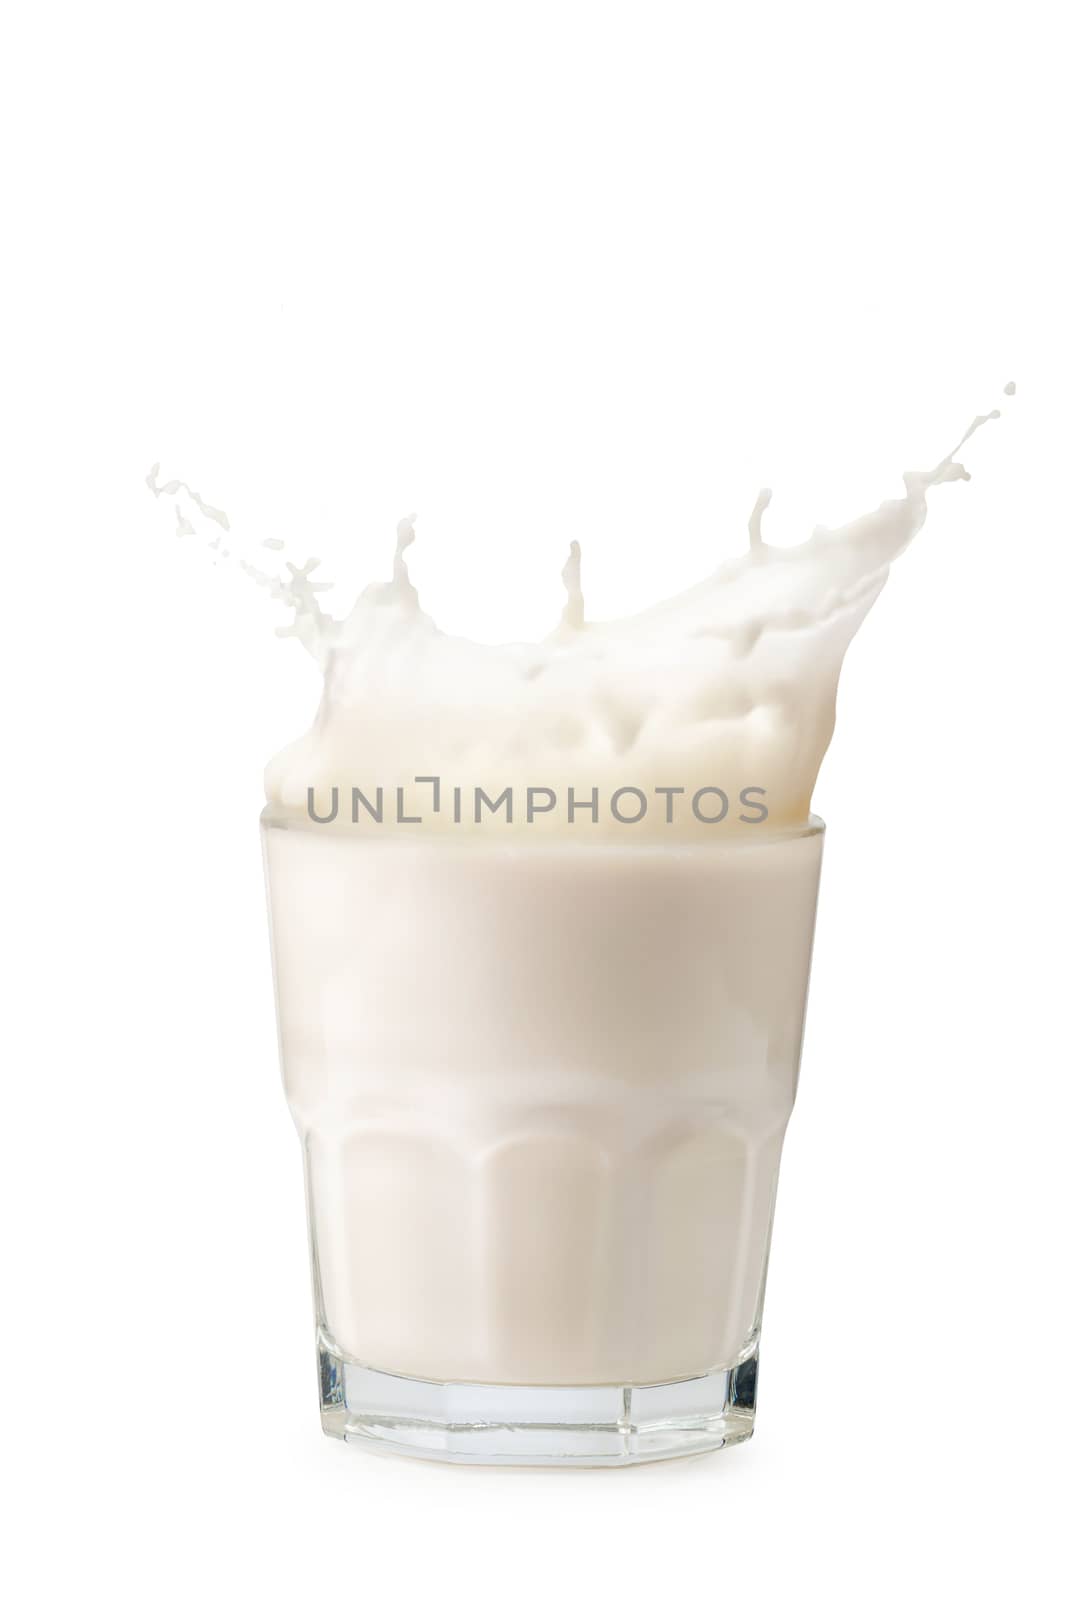 Splashes of milk from the glass isolated on white background.